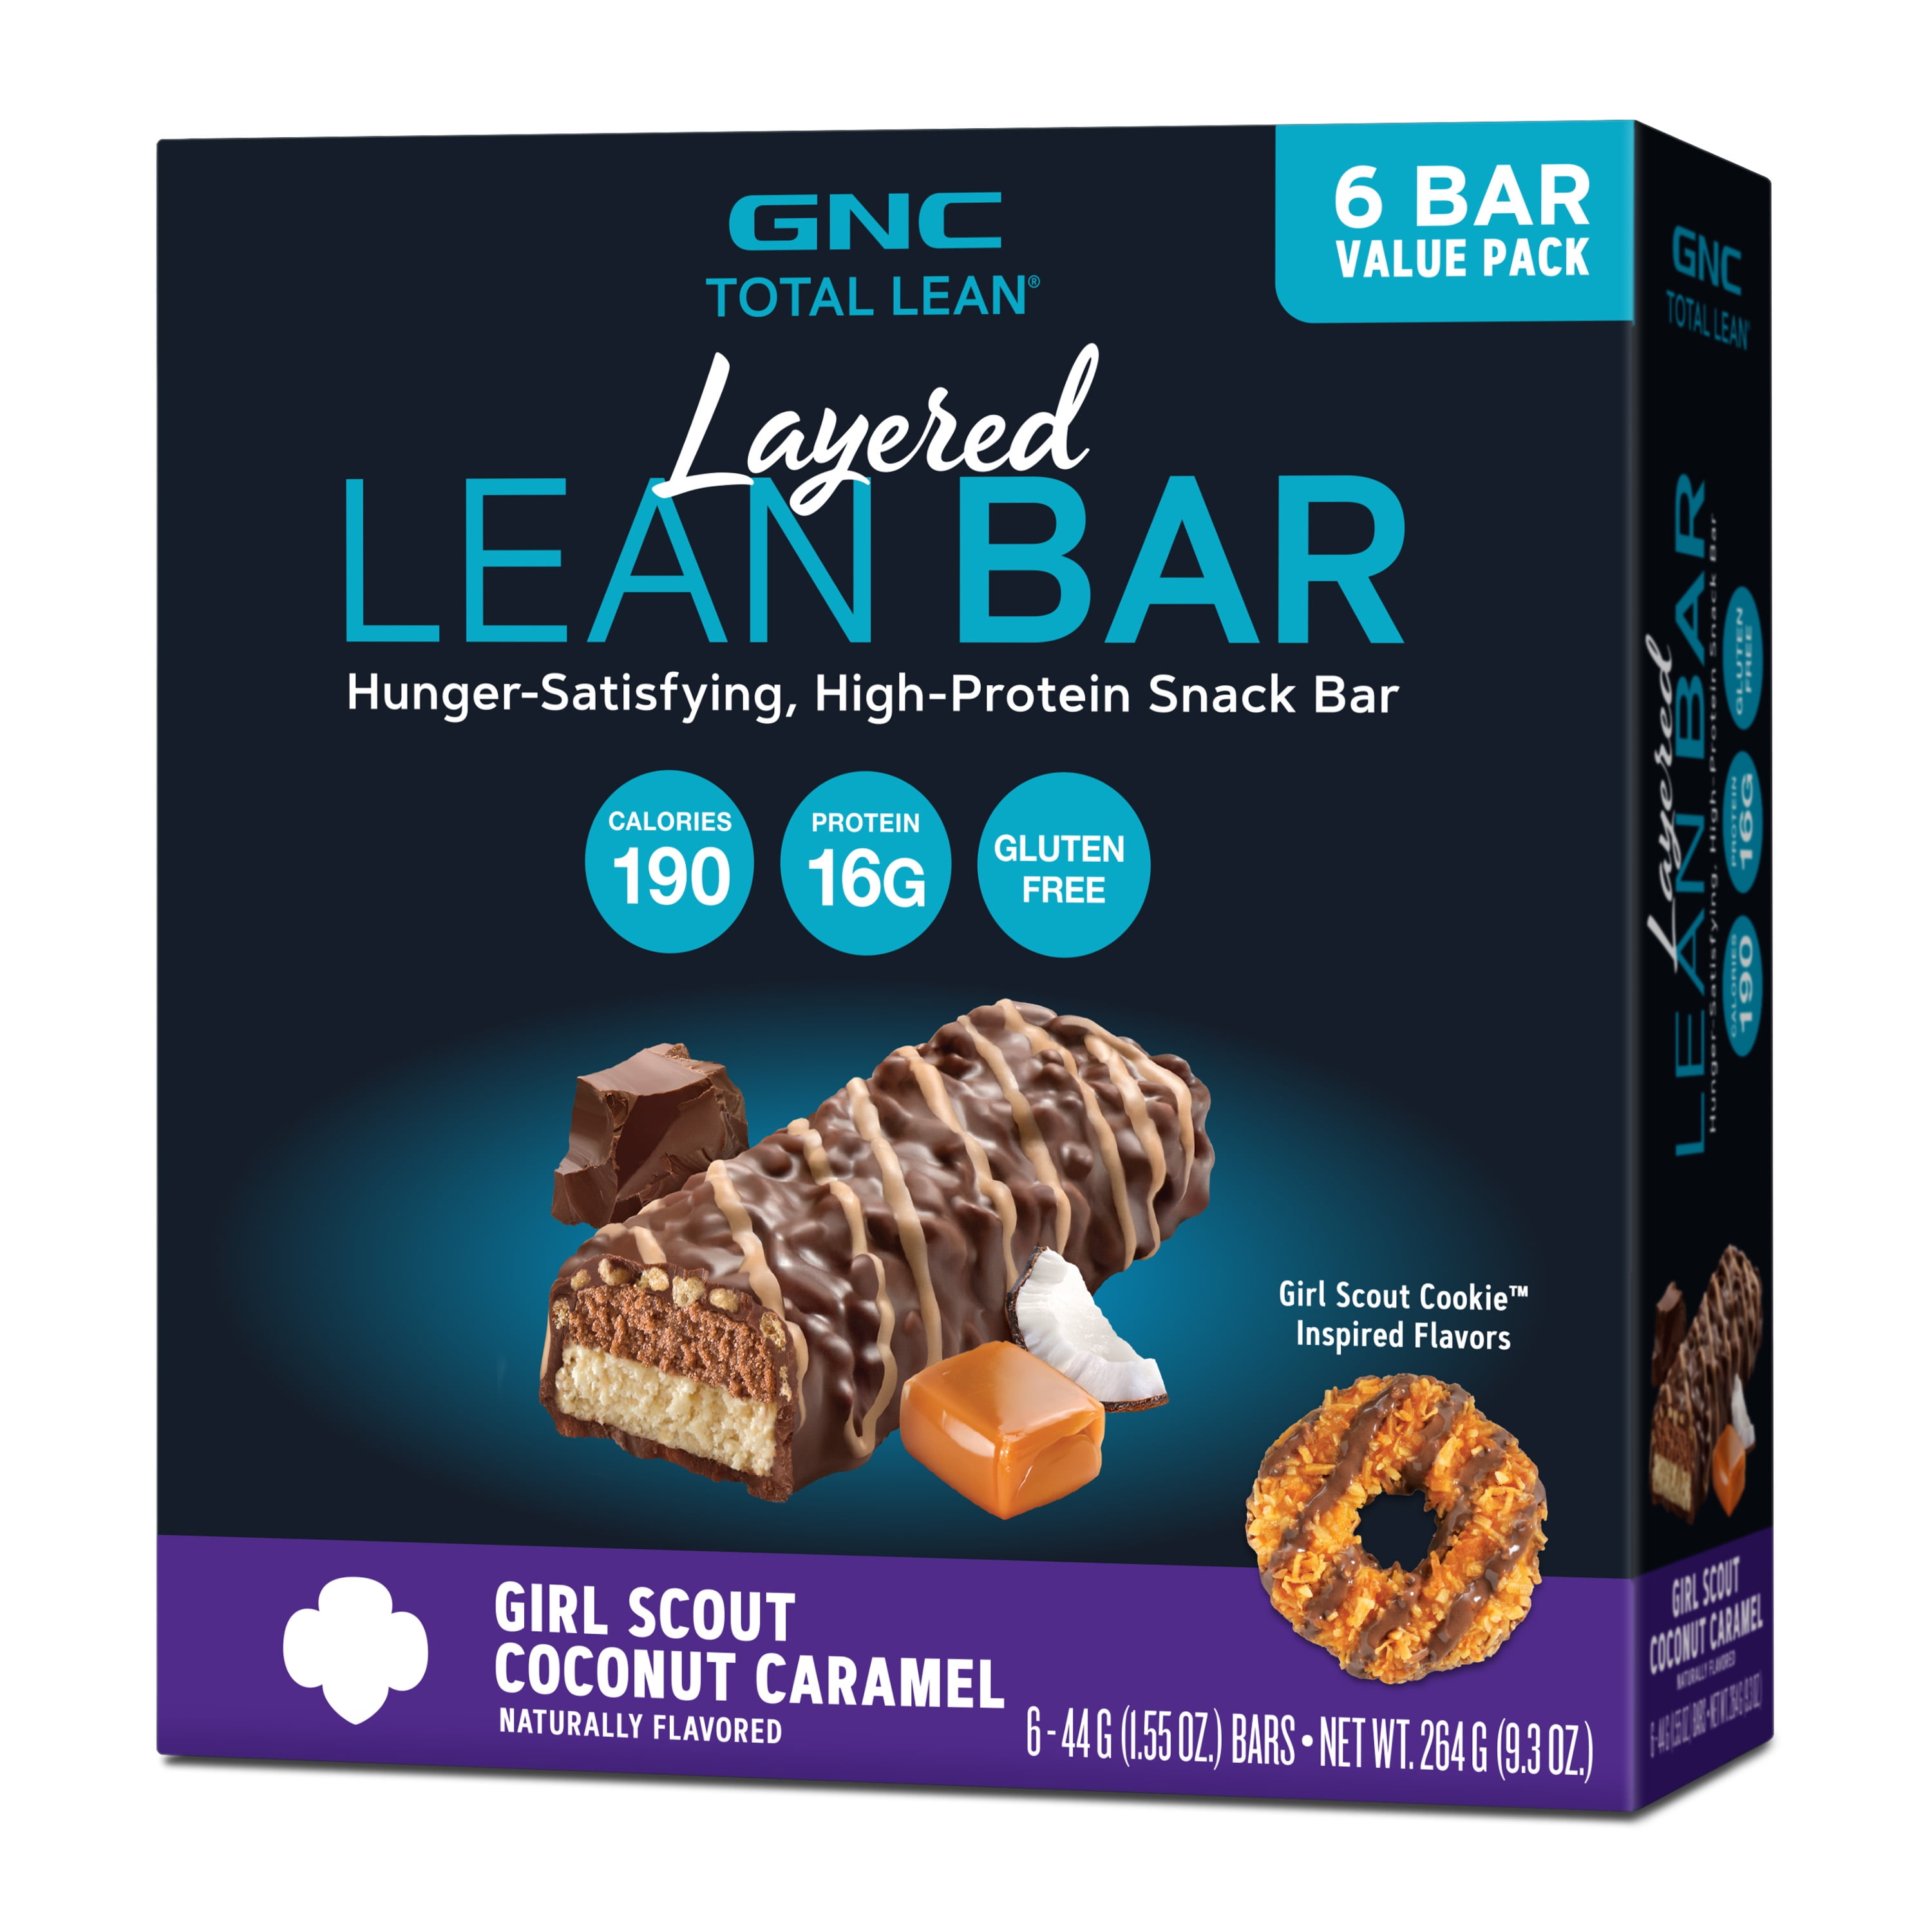 GNC Total Lean, Lean Shake 25, To Go Bottles, Low-Carb Protein Shake to  Improve Weight Loss & BMI, Girl Scouts Coconut Caramel